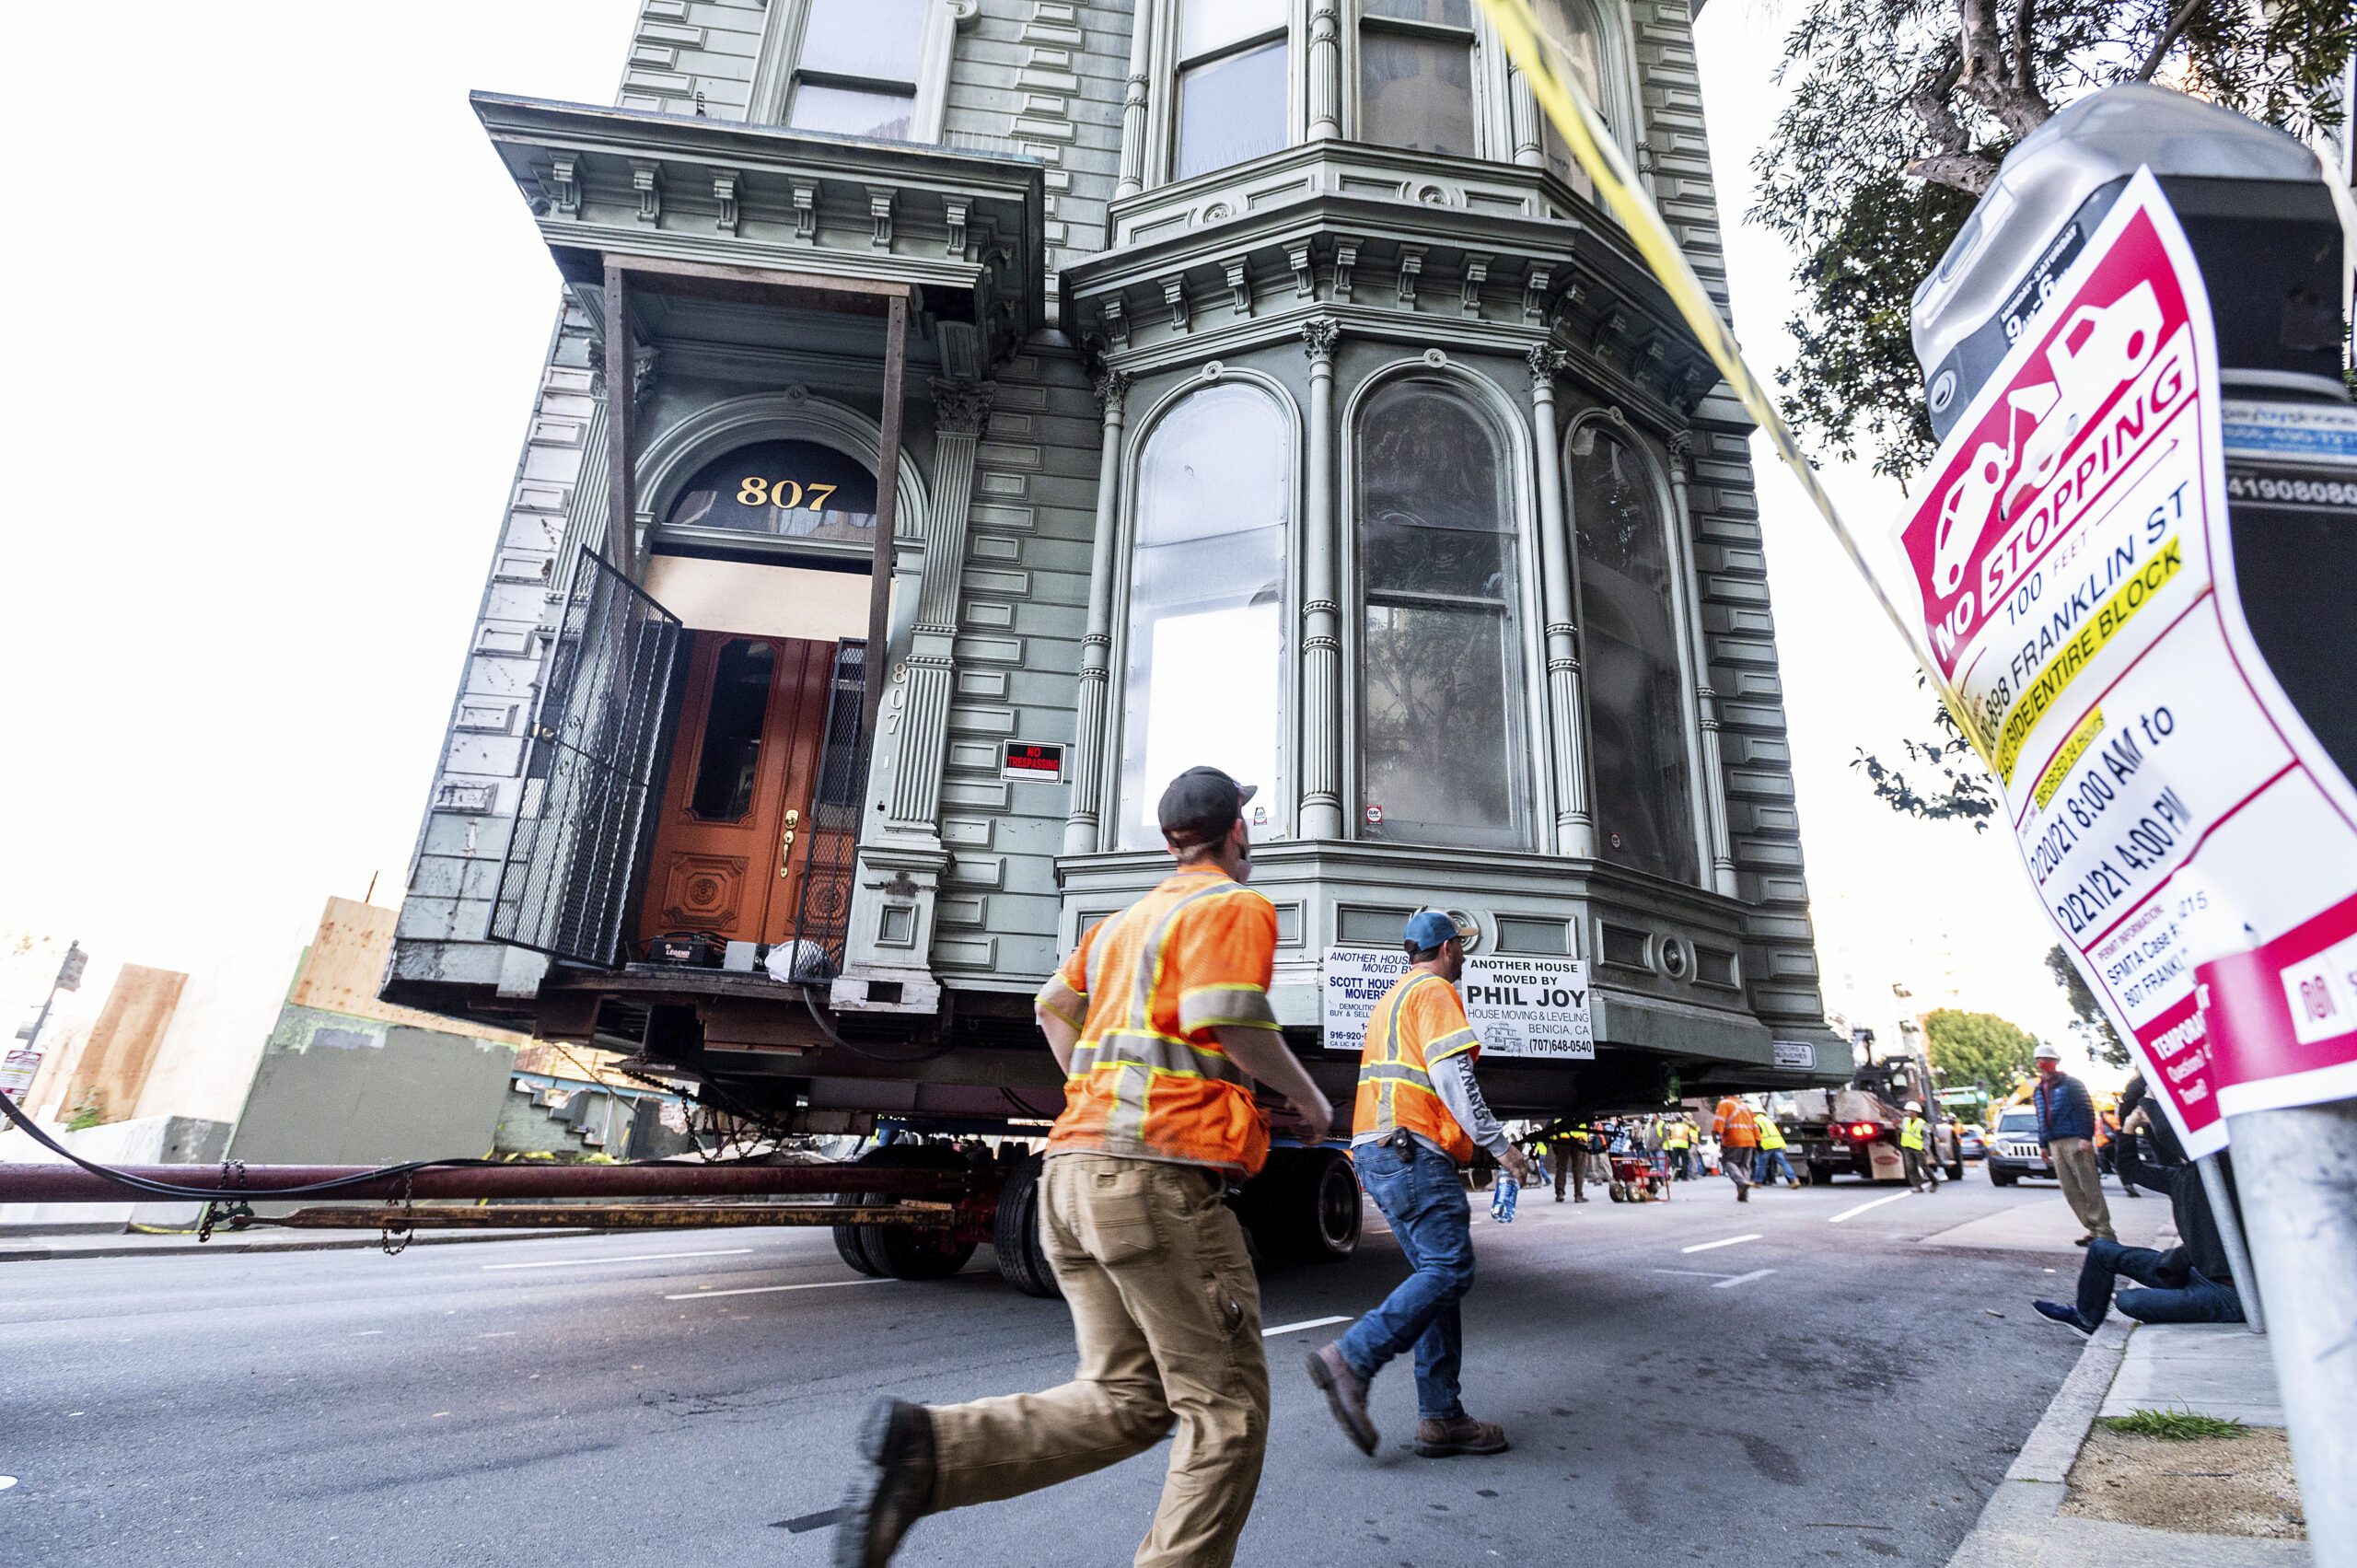 CORRECTS APPROXIMATE COST TO $400,000, INTEAD OF $200,000 - Workers pass a Victorian home as a truck pulls it through San Francisco on Sunday, Feb. 21, 2021. The house, built in 1882, was moved to a new location about six blocks away to make room for a condominium development. According to the consultant overseeing the project, the move cost approximately $400,000 and involved removing street lights, parking meters, and utility lines. (AP Photo/Noah Berger)